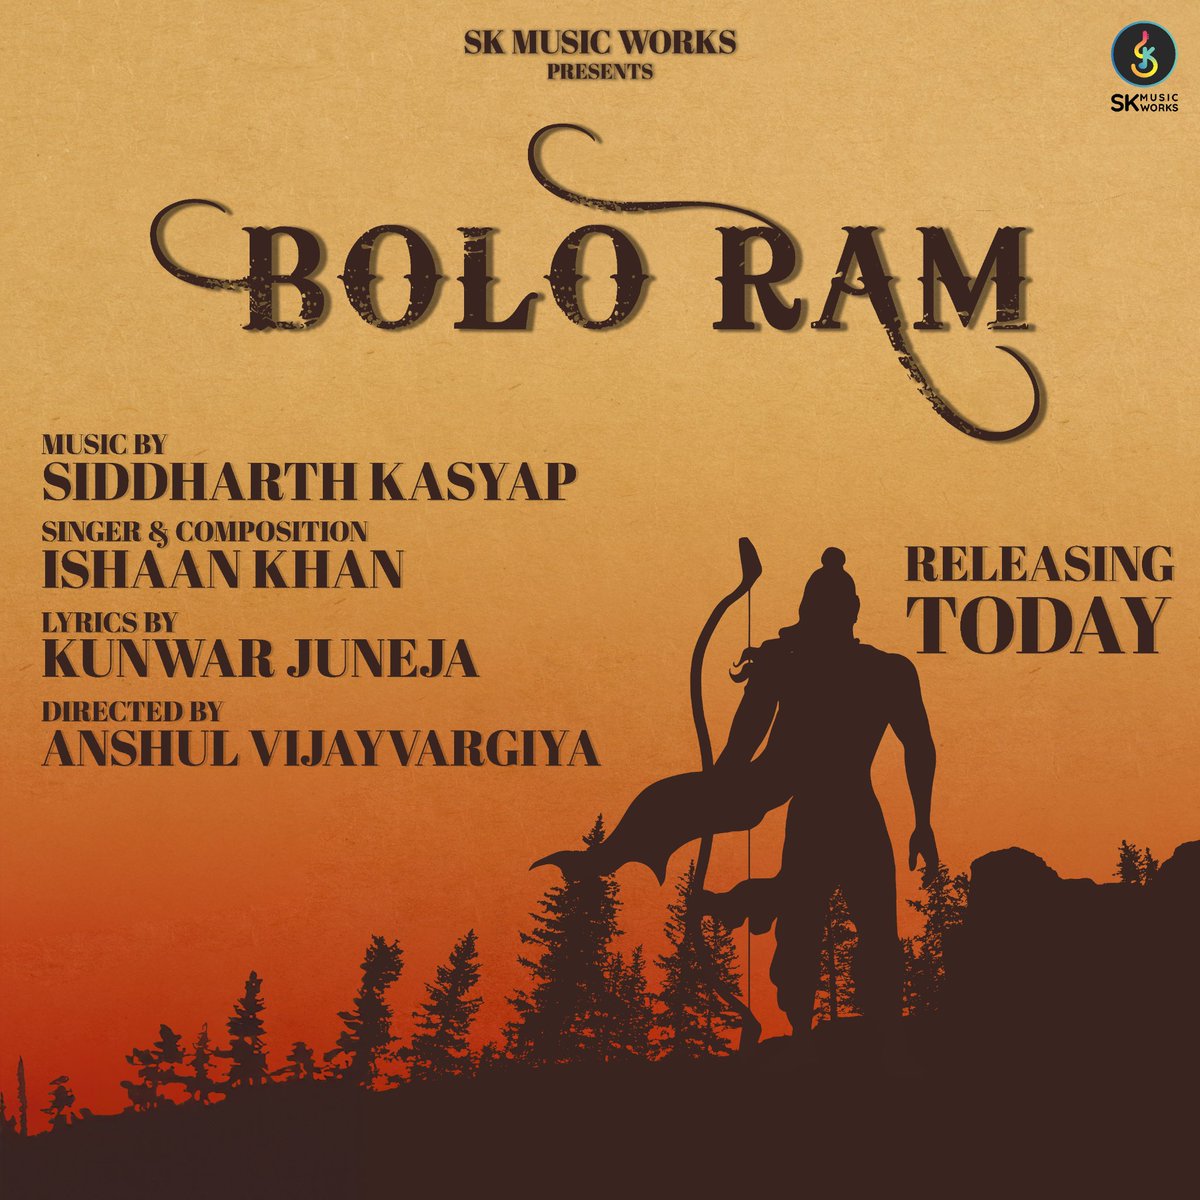 Today's the day! 🎉✨ Join the celebration as we are releasing our second song 'Bolo Ram,' specially crafted to add a touch of divine melody by chanting the holy name. 🕉️🎶 #BoloRam #JaiShreeRam #RamMandir #Celebration #Ayodhya #SiddharthKasyap #IshaanKhan #KunwarJuneja